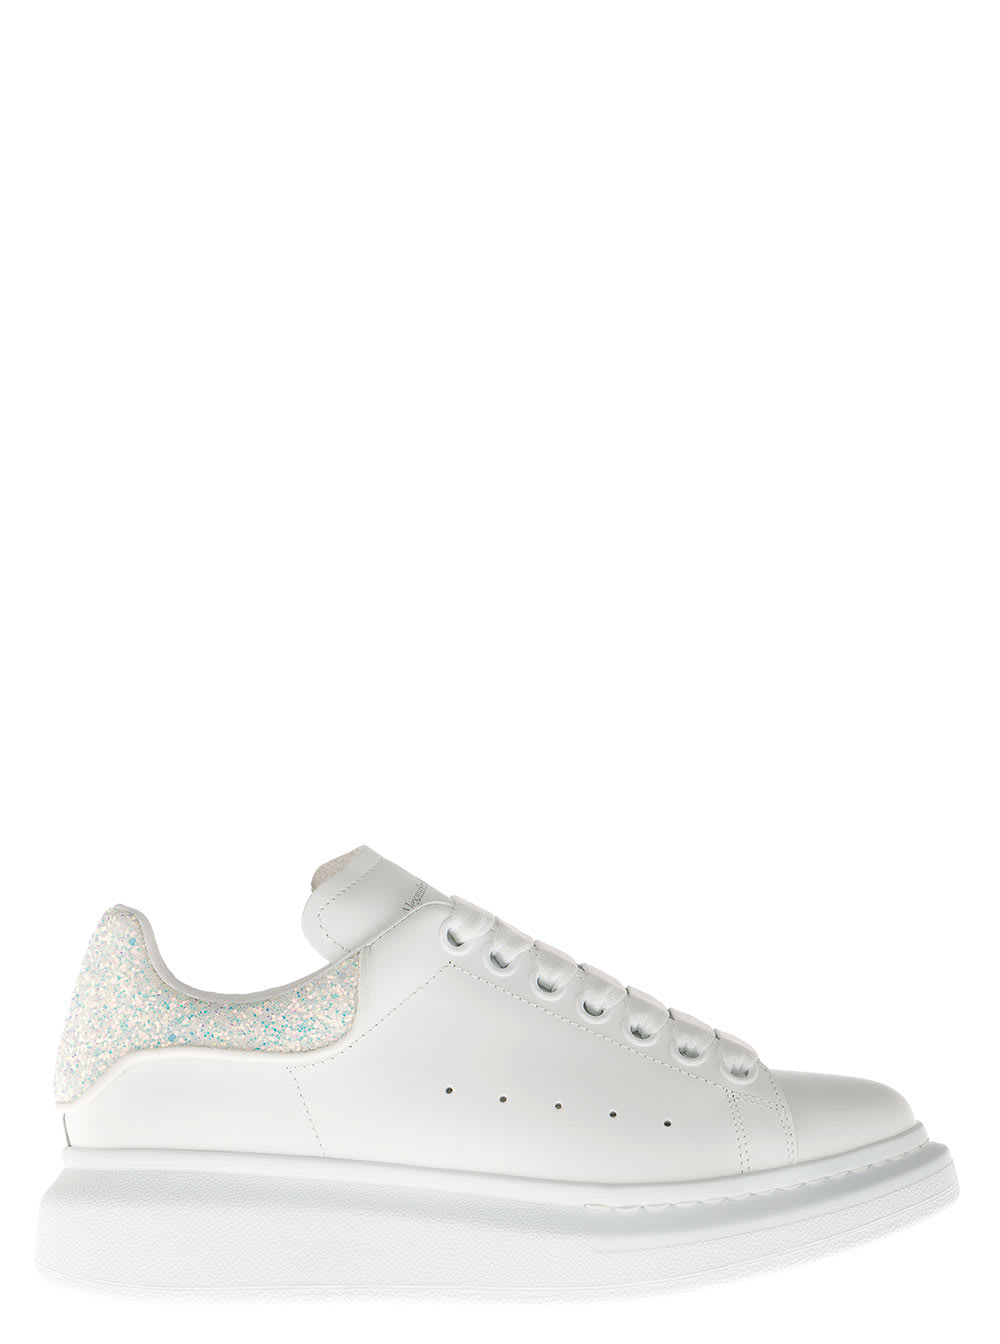 Alexander McQueen Oversize White Leather Sneakers With Glitter Detail